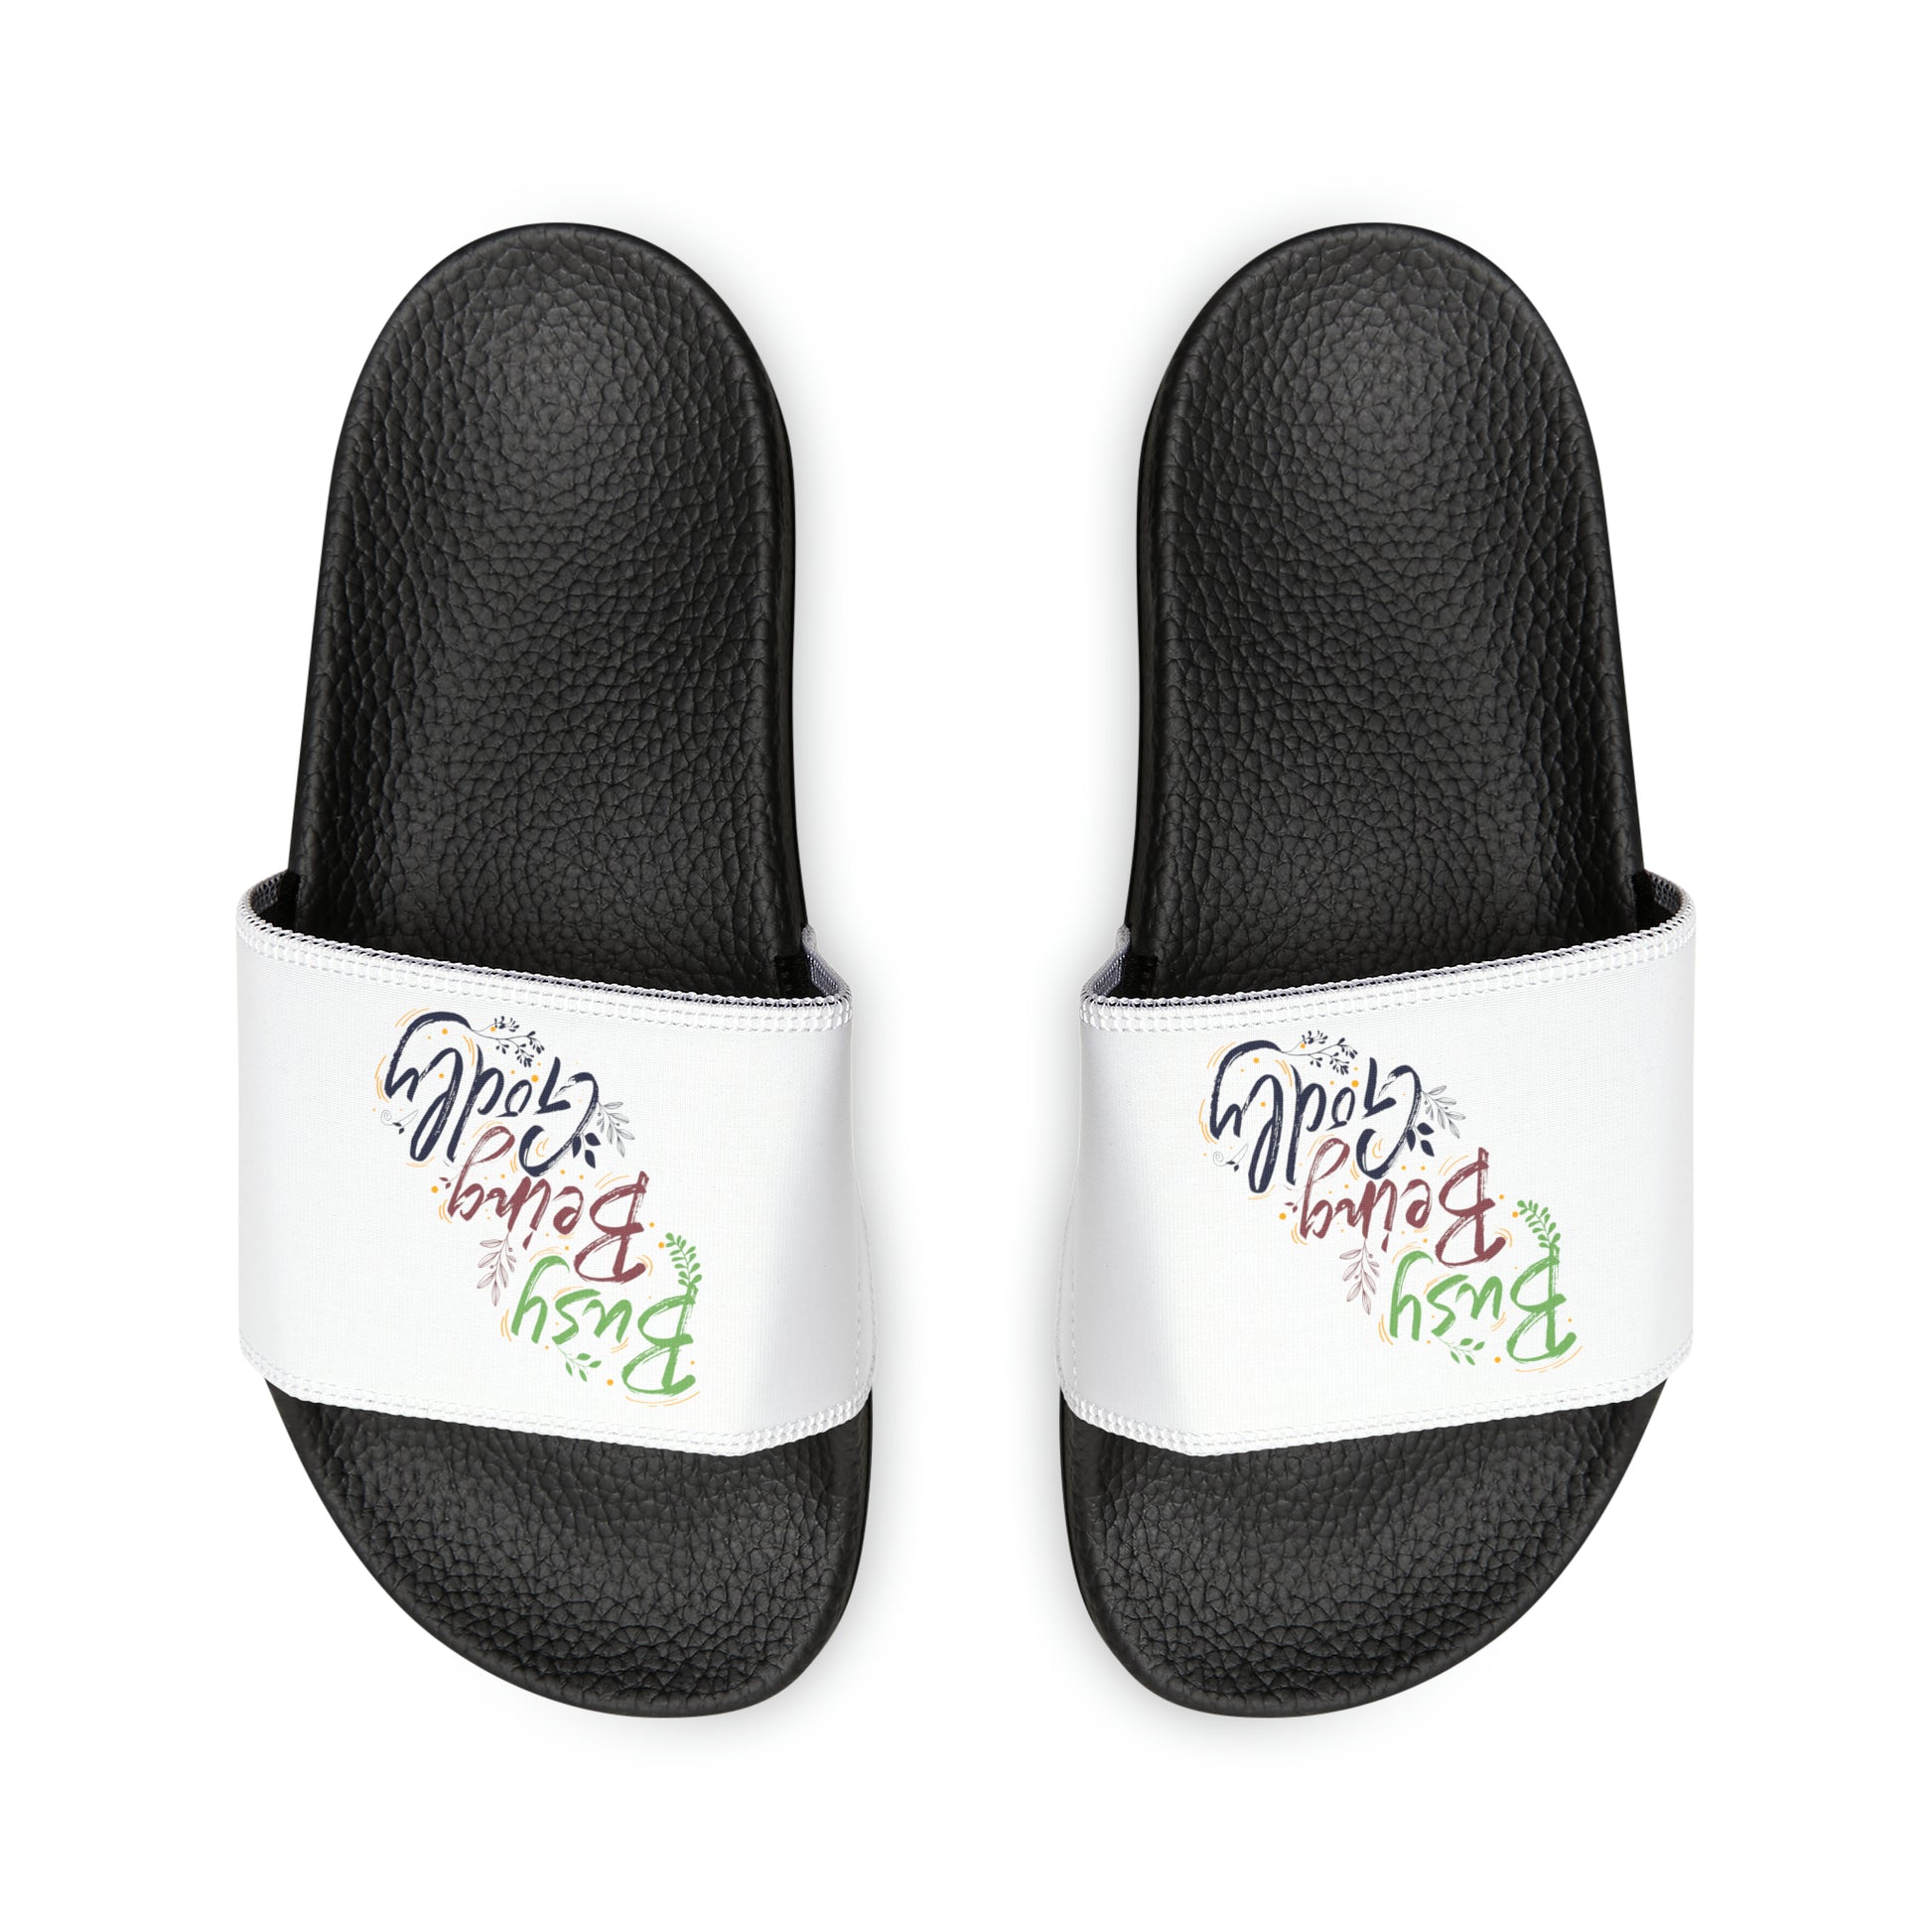 Busy Being Godly Women's PU Christian Slide Sandals Printify